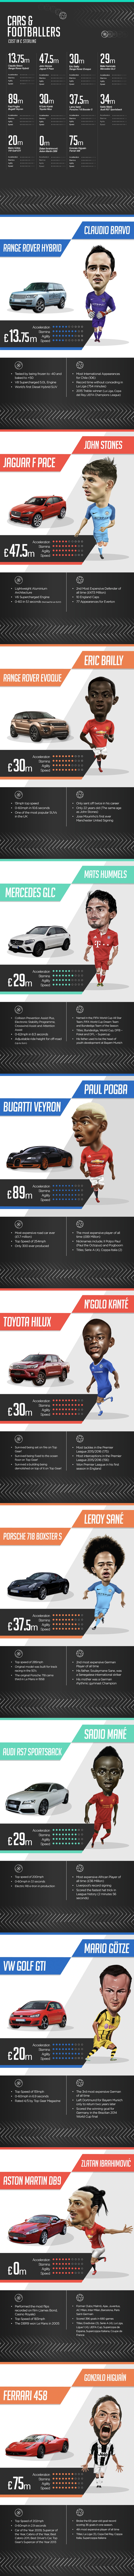 What If the Top Transfers of This Summer Were Cars?